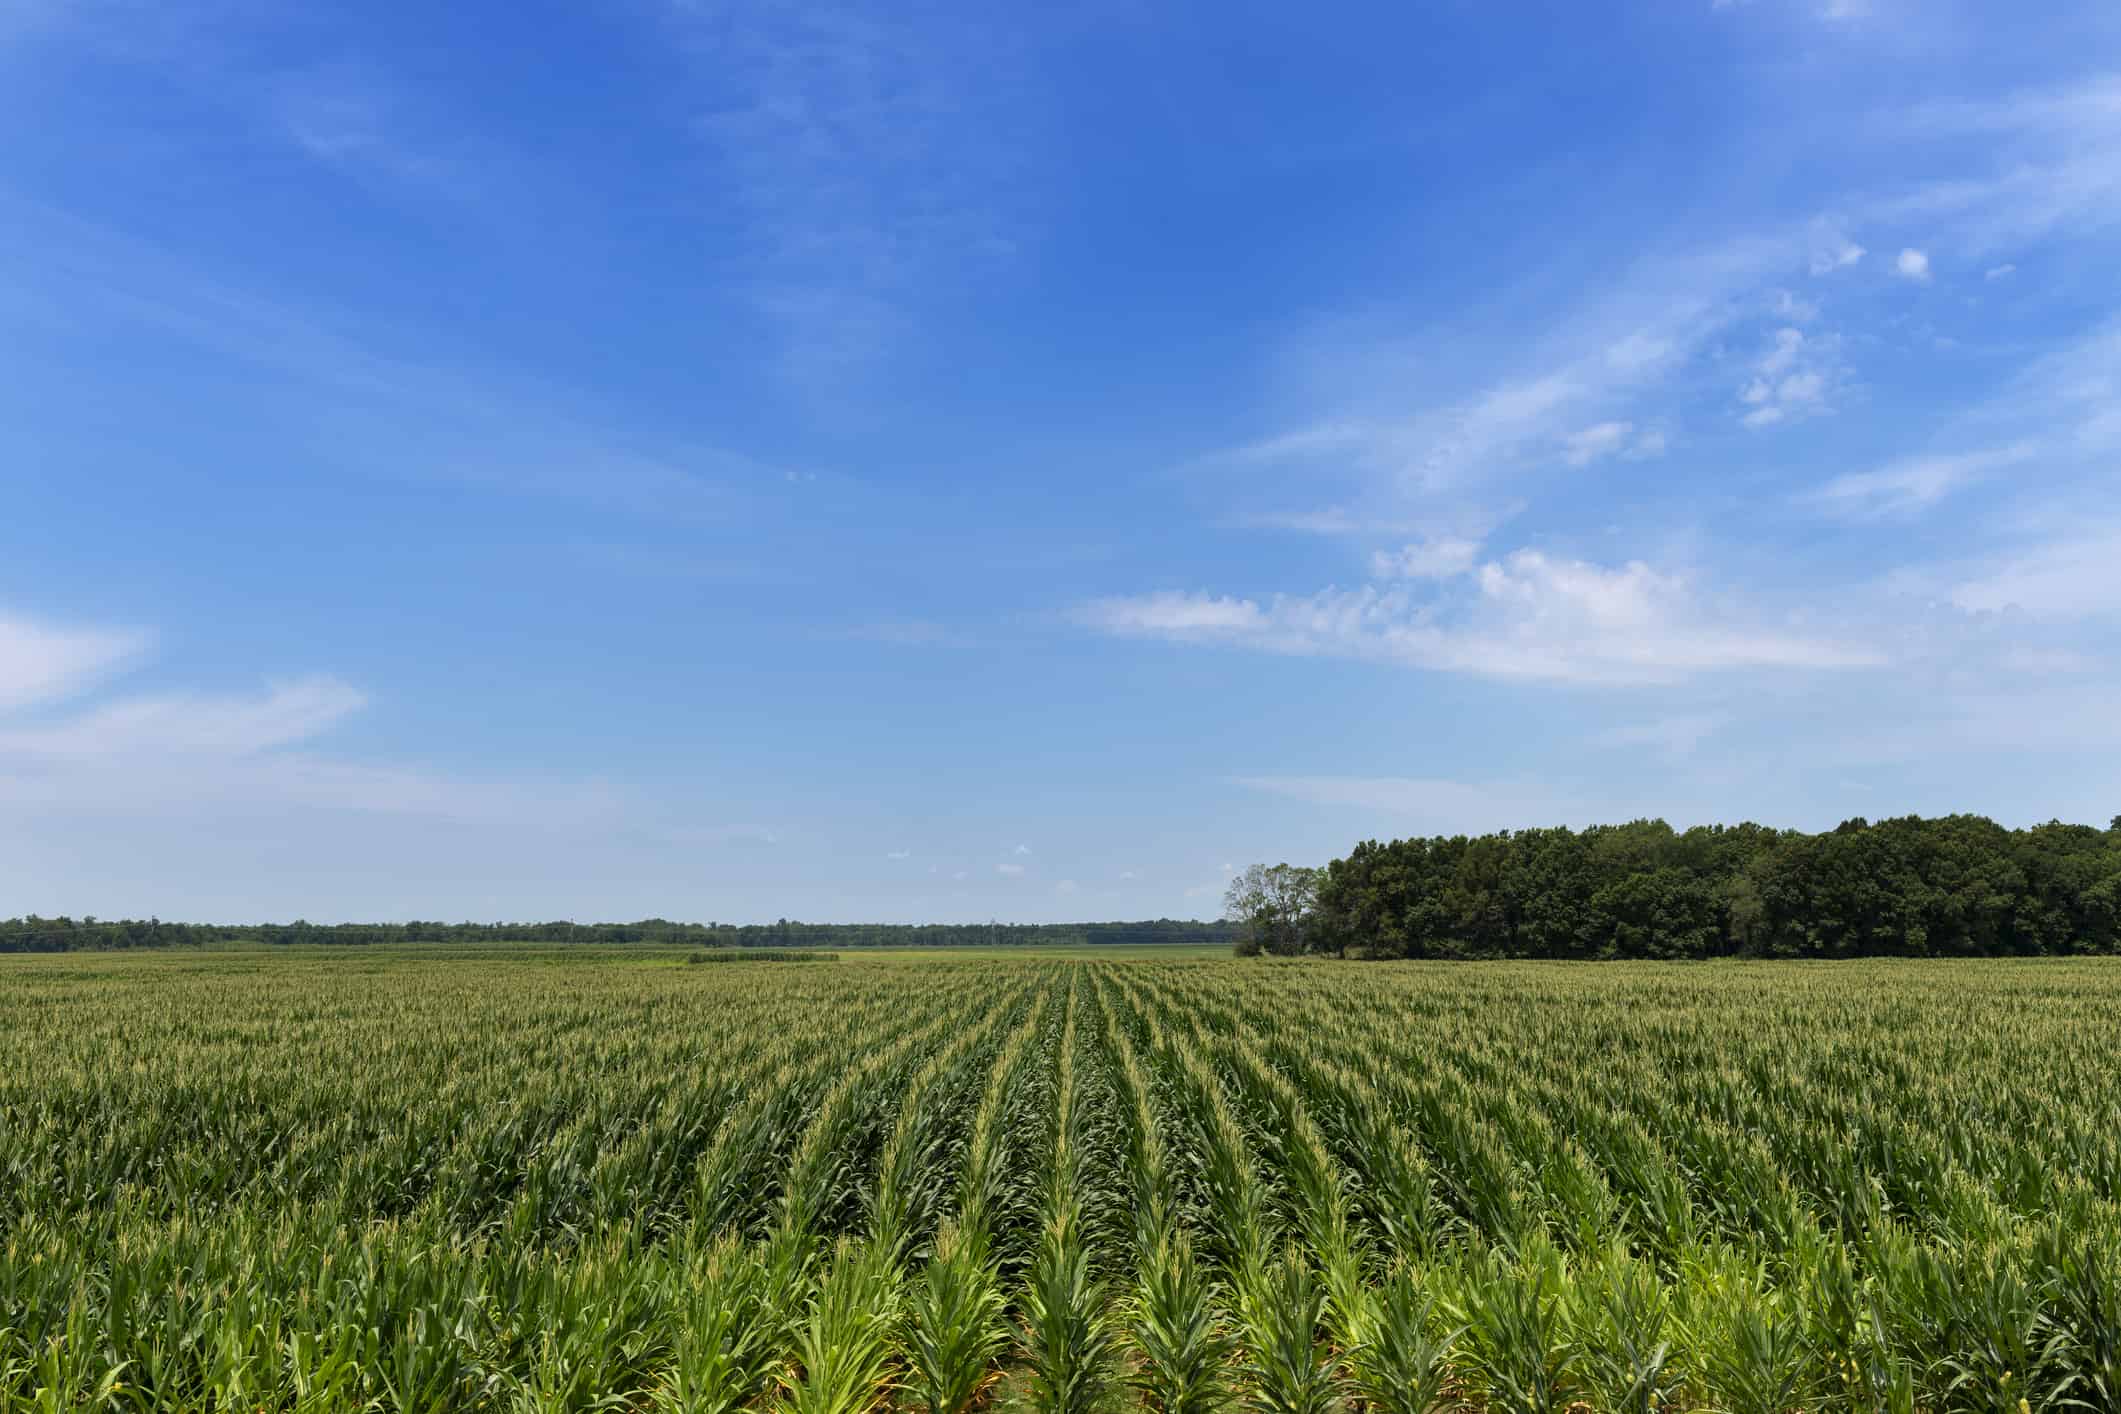 View of a cornfield in a rural area of the Mississippi State